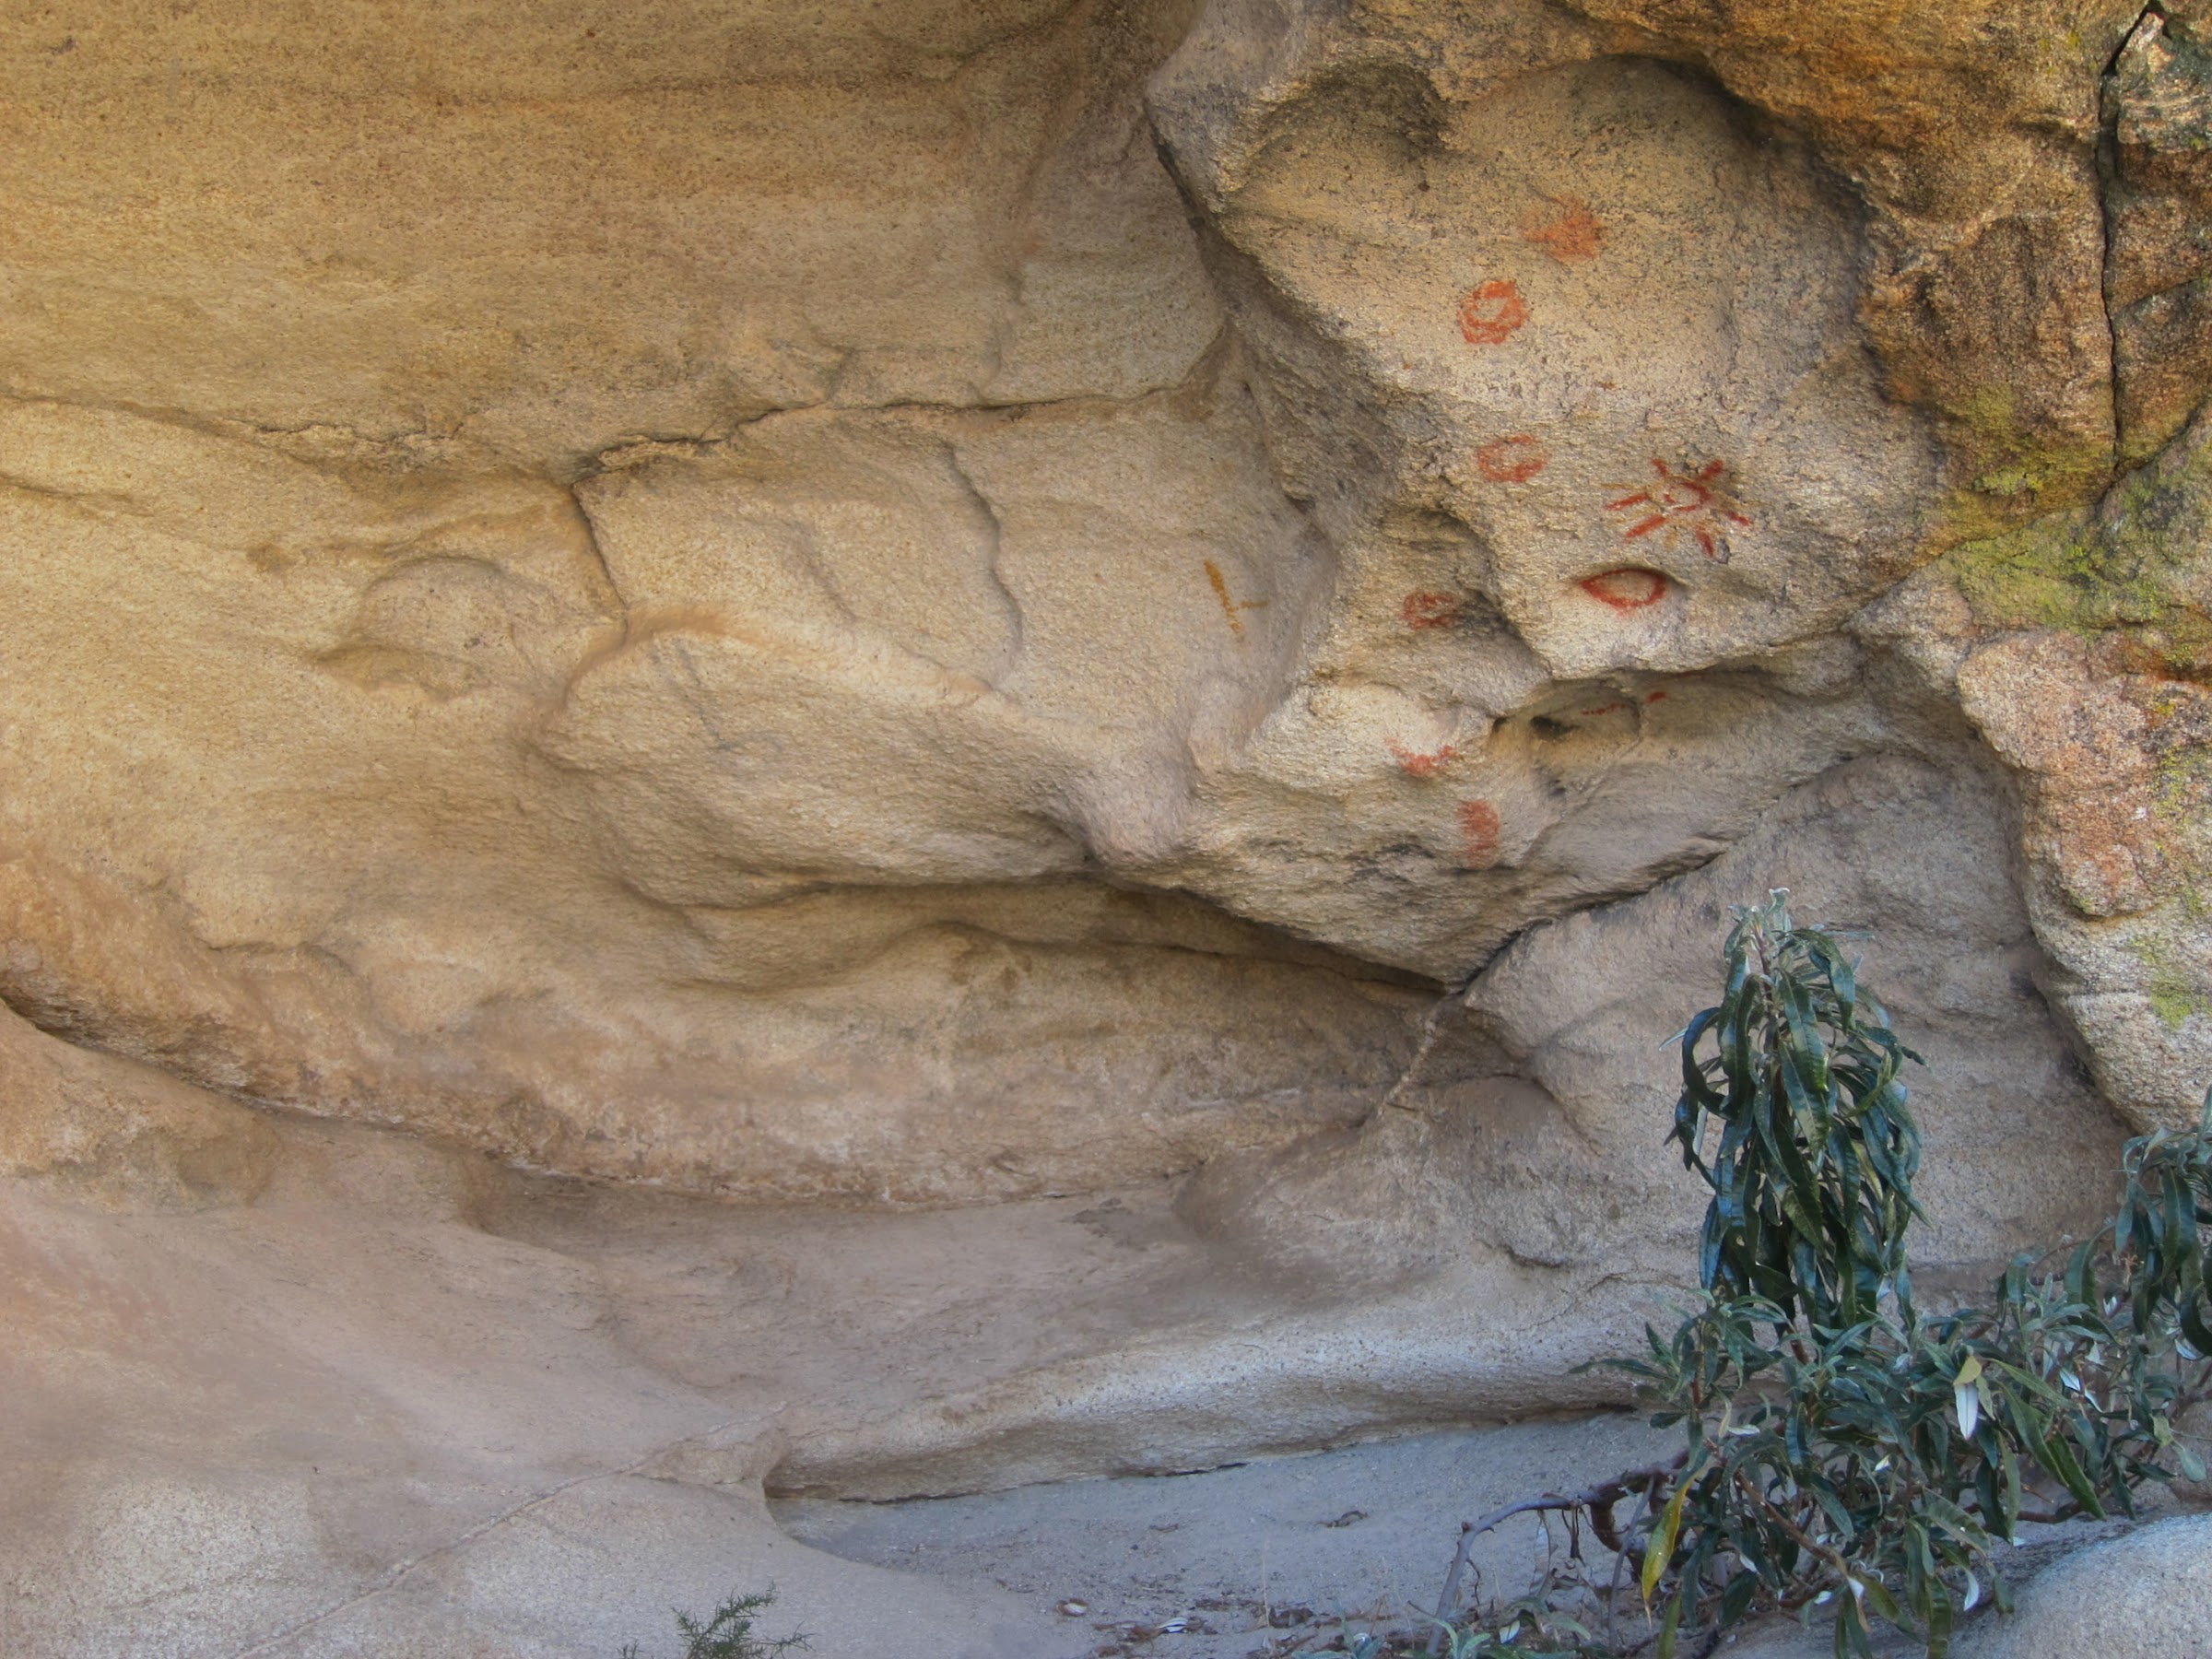 Abandoned Trains and Native American Pictographs in Jacumba